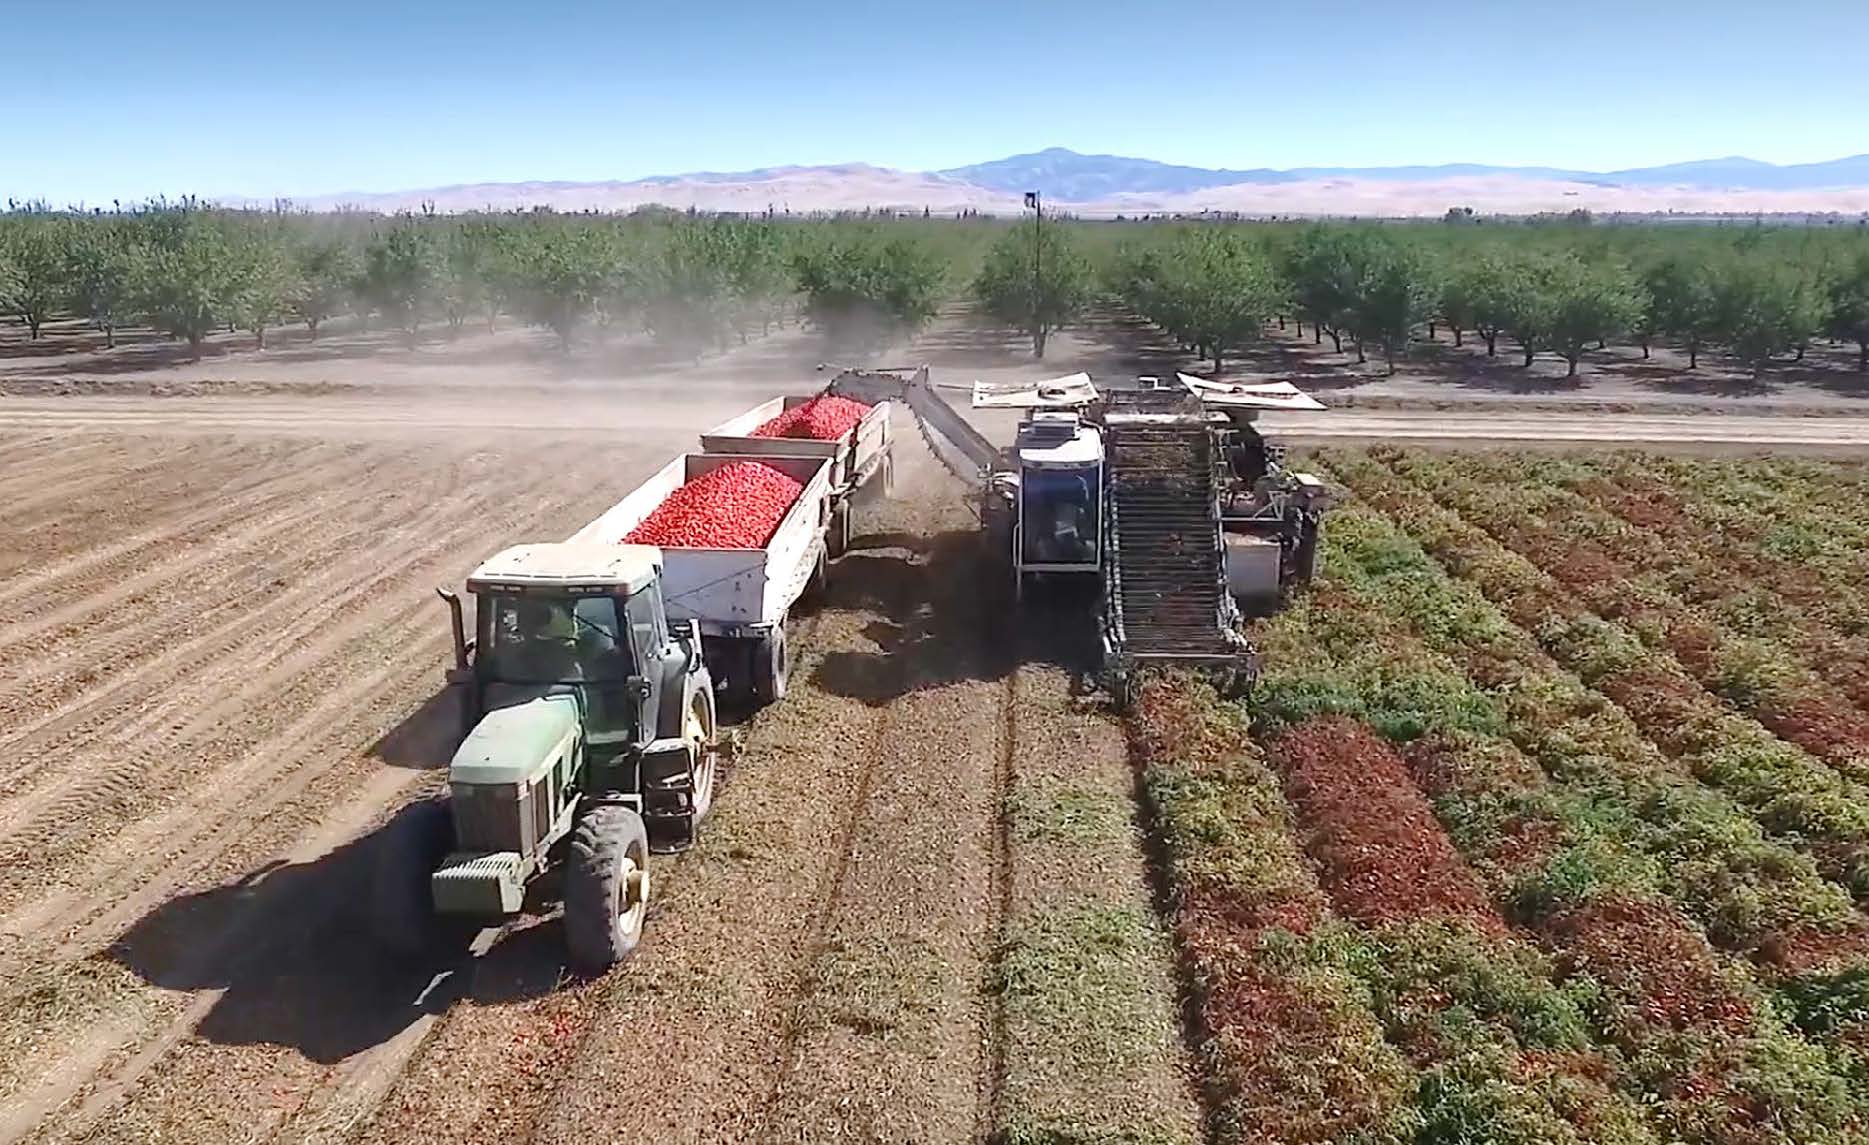 A tomato harvester and a group of farm vehicles in a field  during the harvesting process